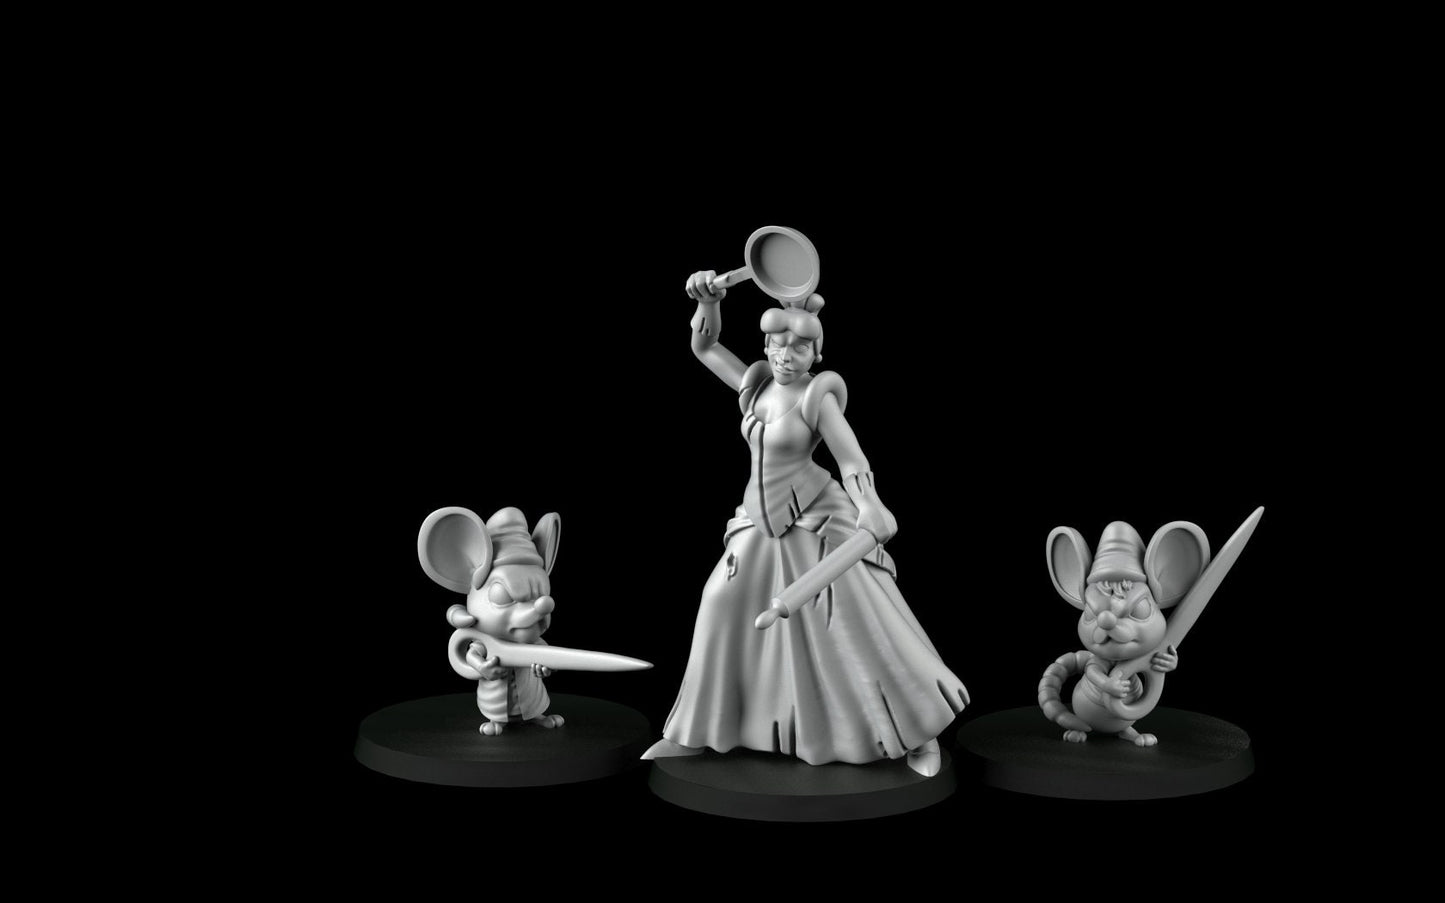 Cinderella (32mm)- Angry Princesses - ideal for Dungeons and Dragons and other Tabletop RPGs